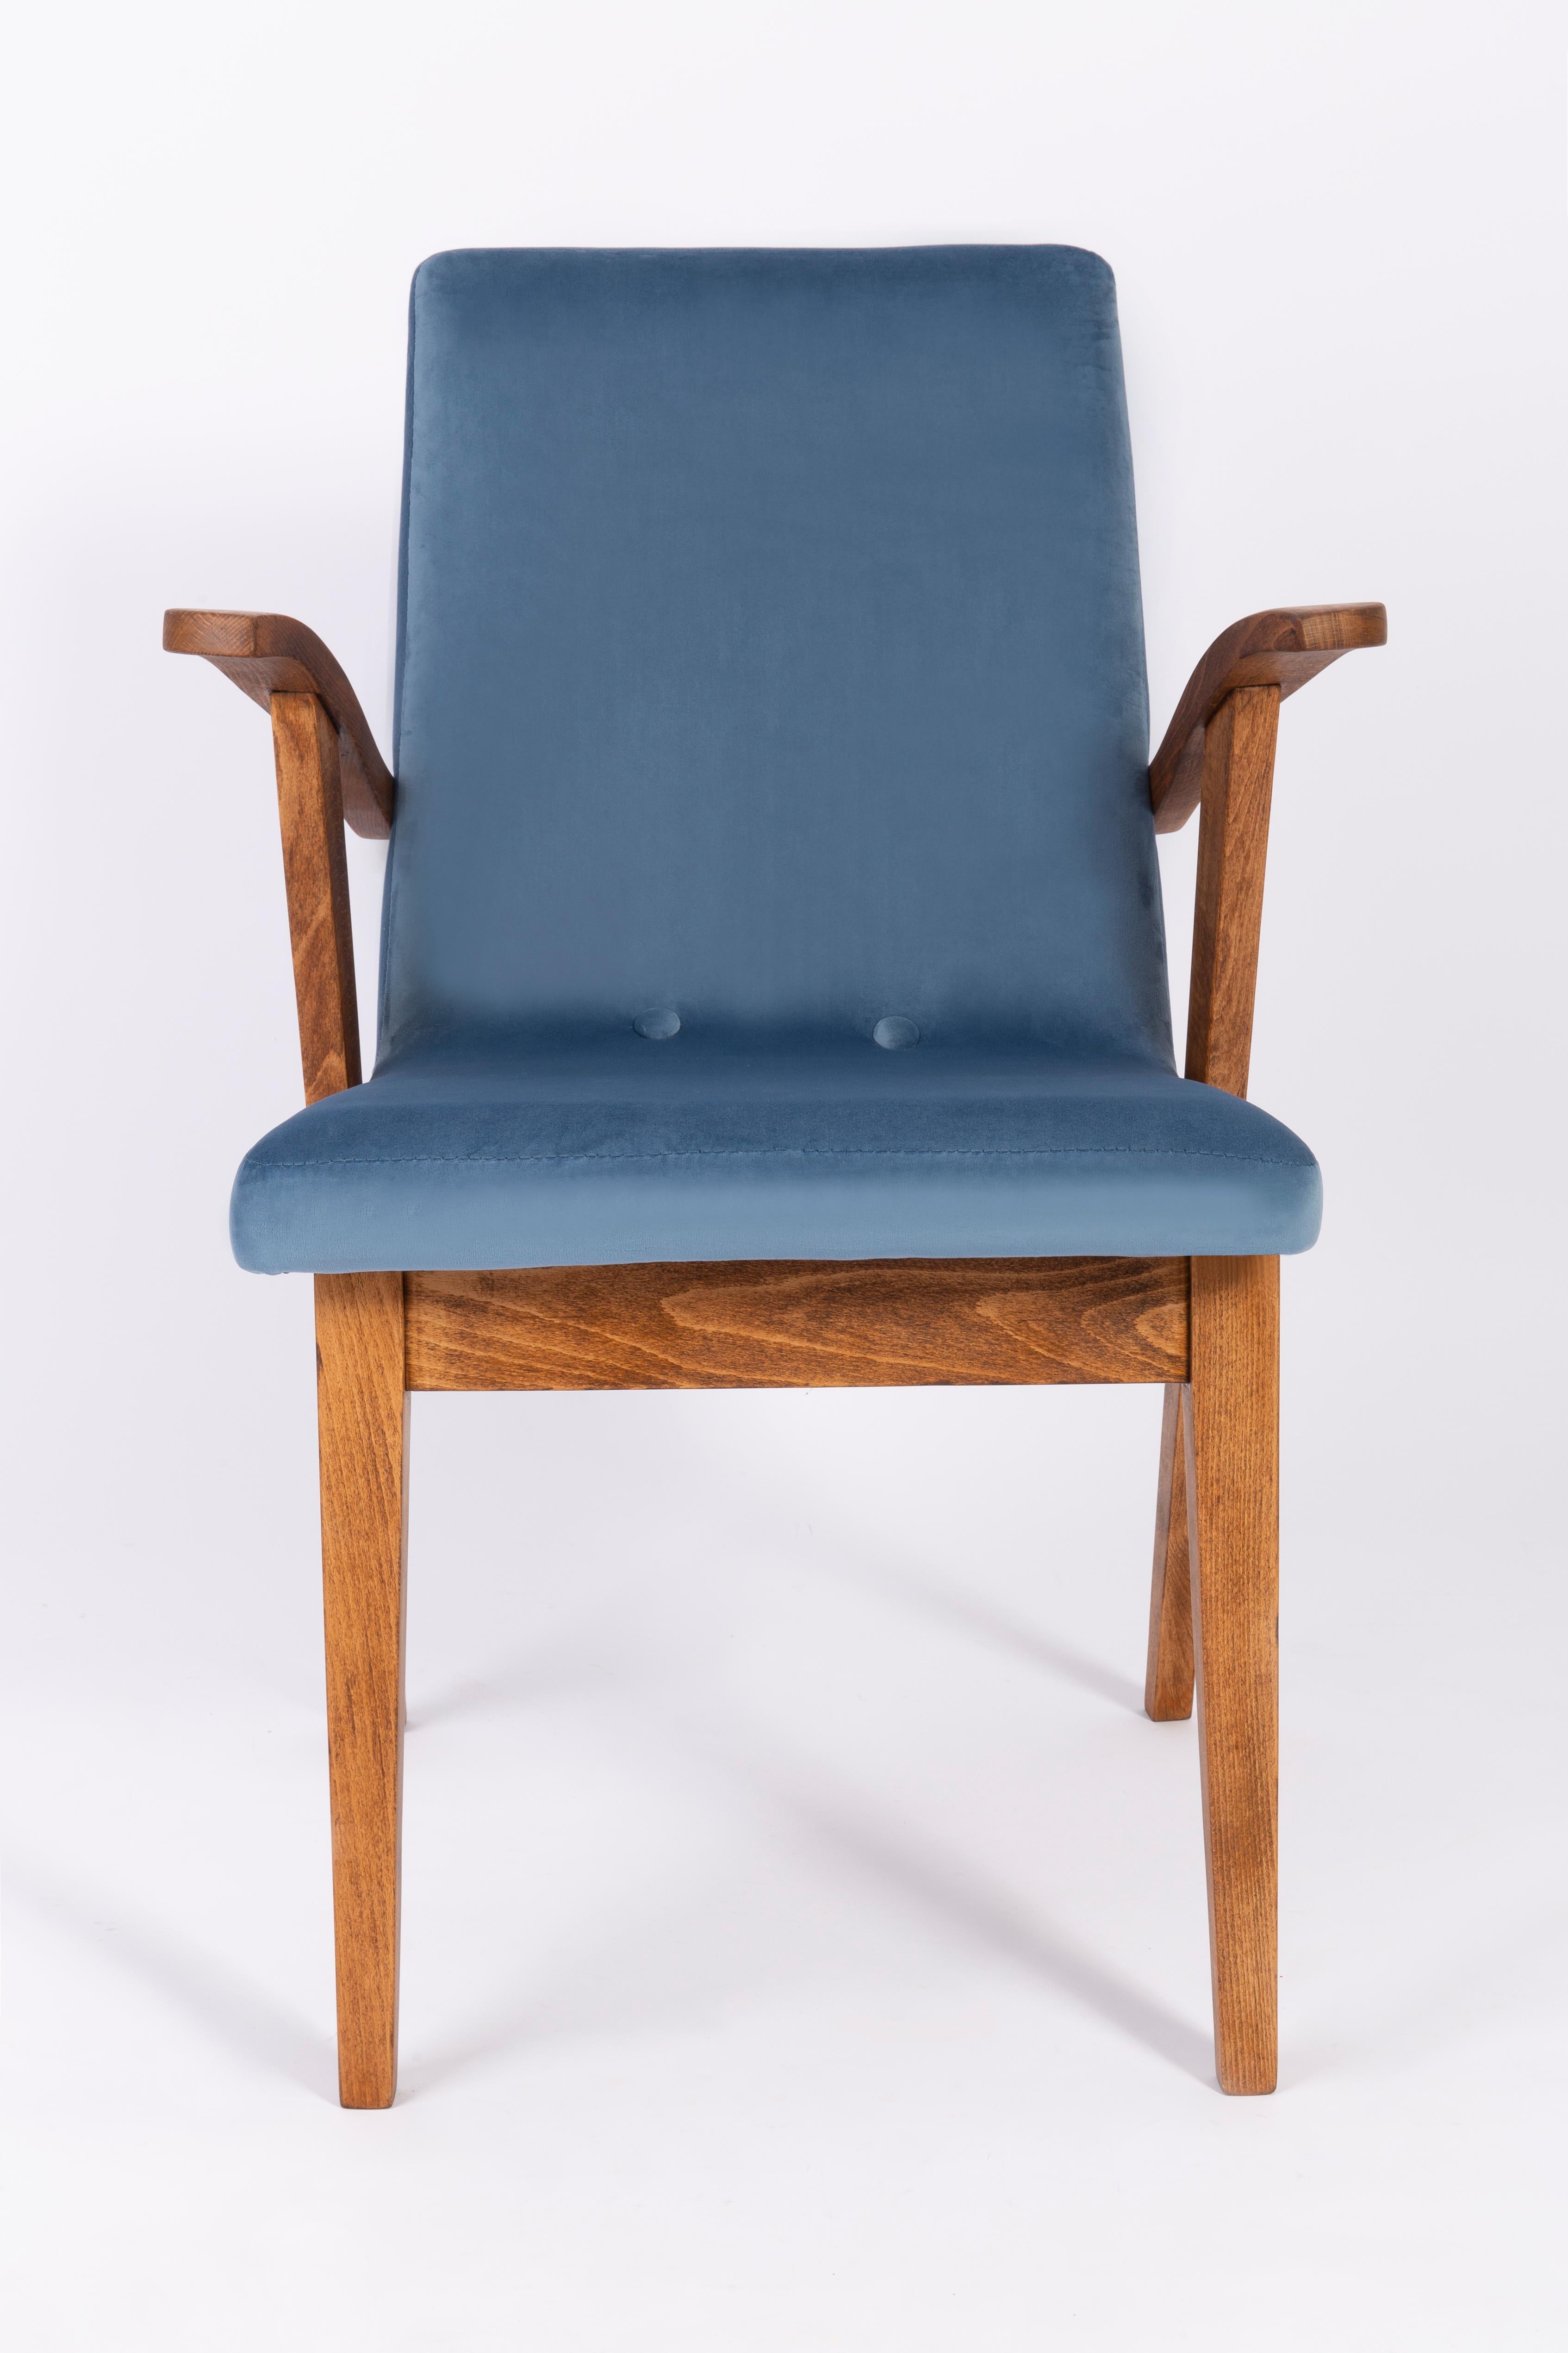 Polish Pair of 20th Century Vintage Blue Chairs by Mieczyslaw Puchala, 1960s For Sale